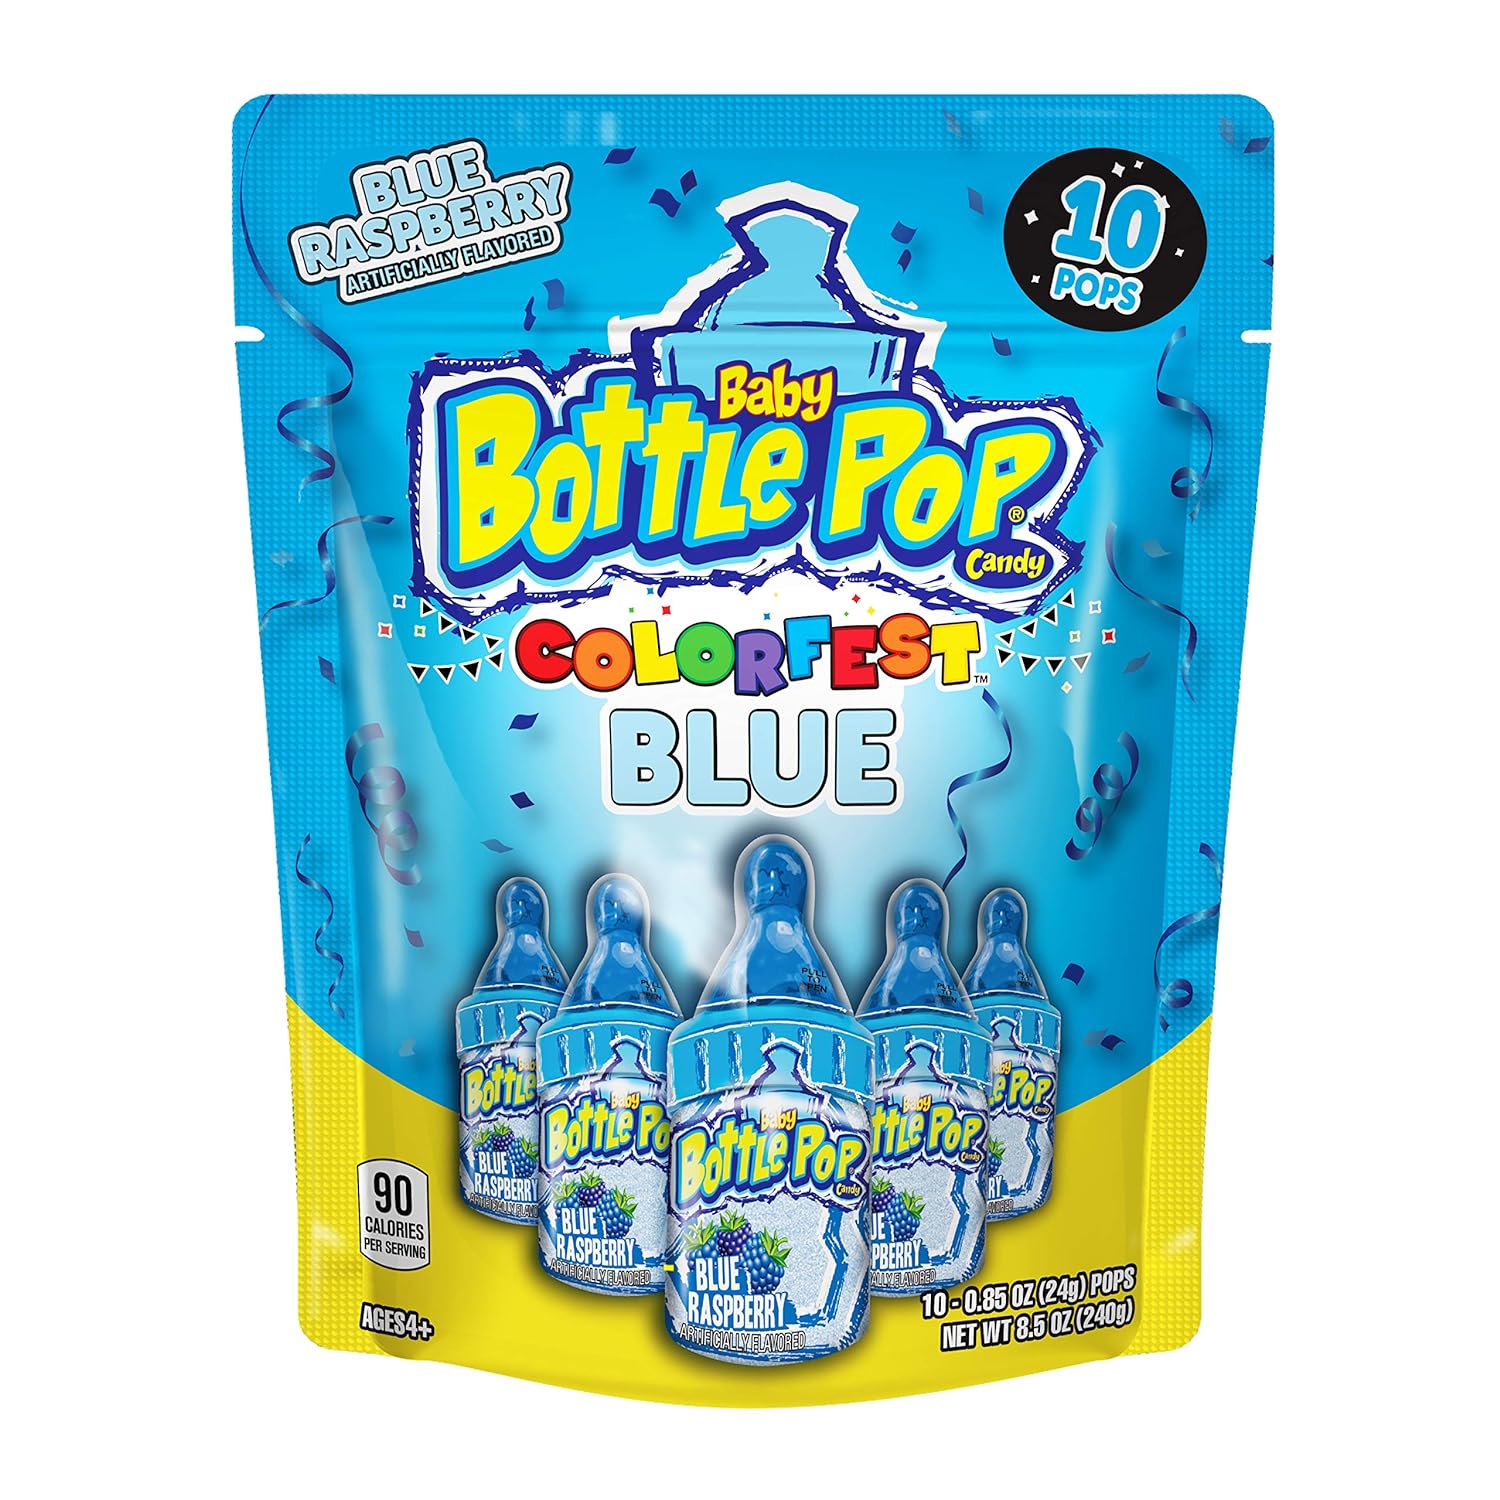  Baby Bottle Pop Individually Wrapped Party Pack With Flavored Candy/Lollipop Suckers & Candy for Celebrations And Virtual Parties, Blue Raspberry, 10 Count Bag